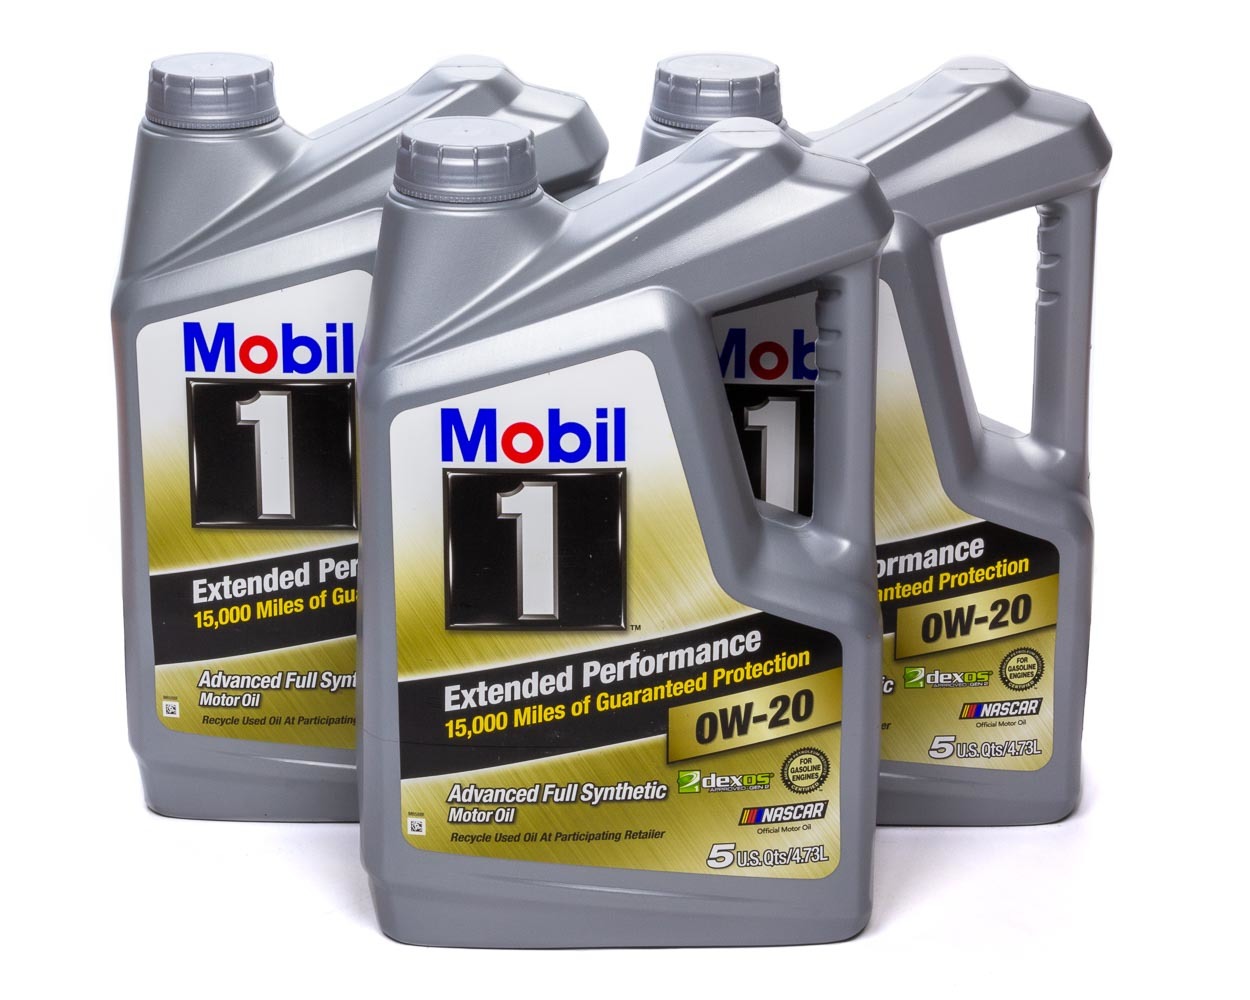 MOBIL 1 Motor Oil Extended Performance 0W20 Synthetic 5 qt Jug Set of 3